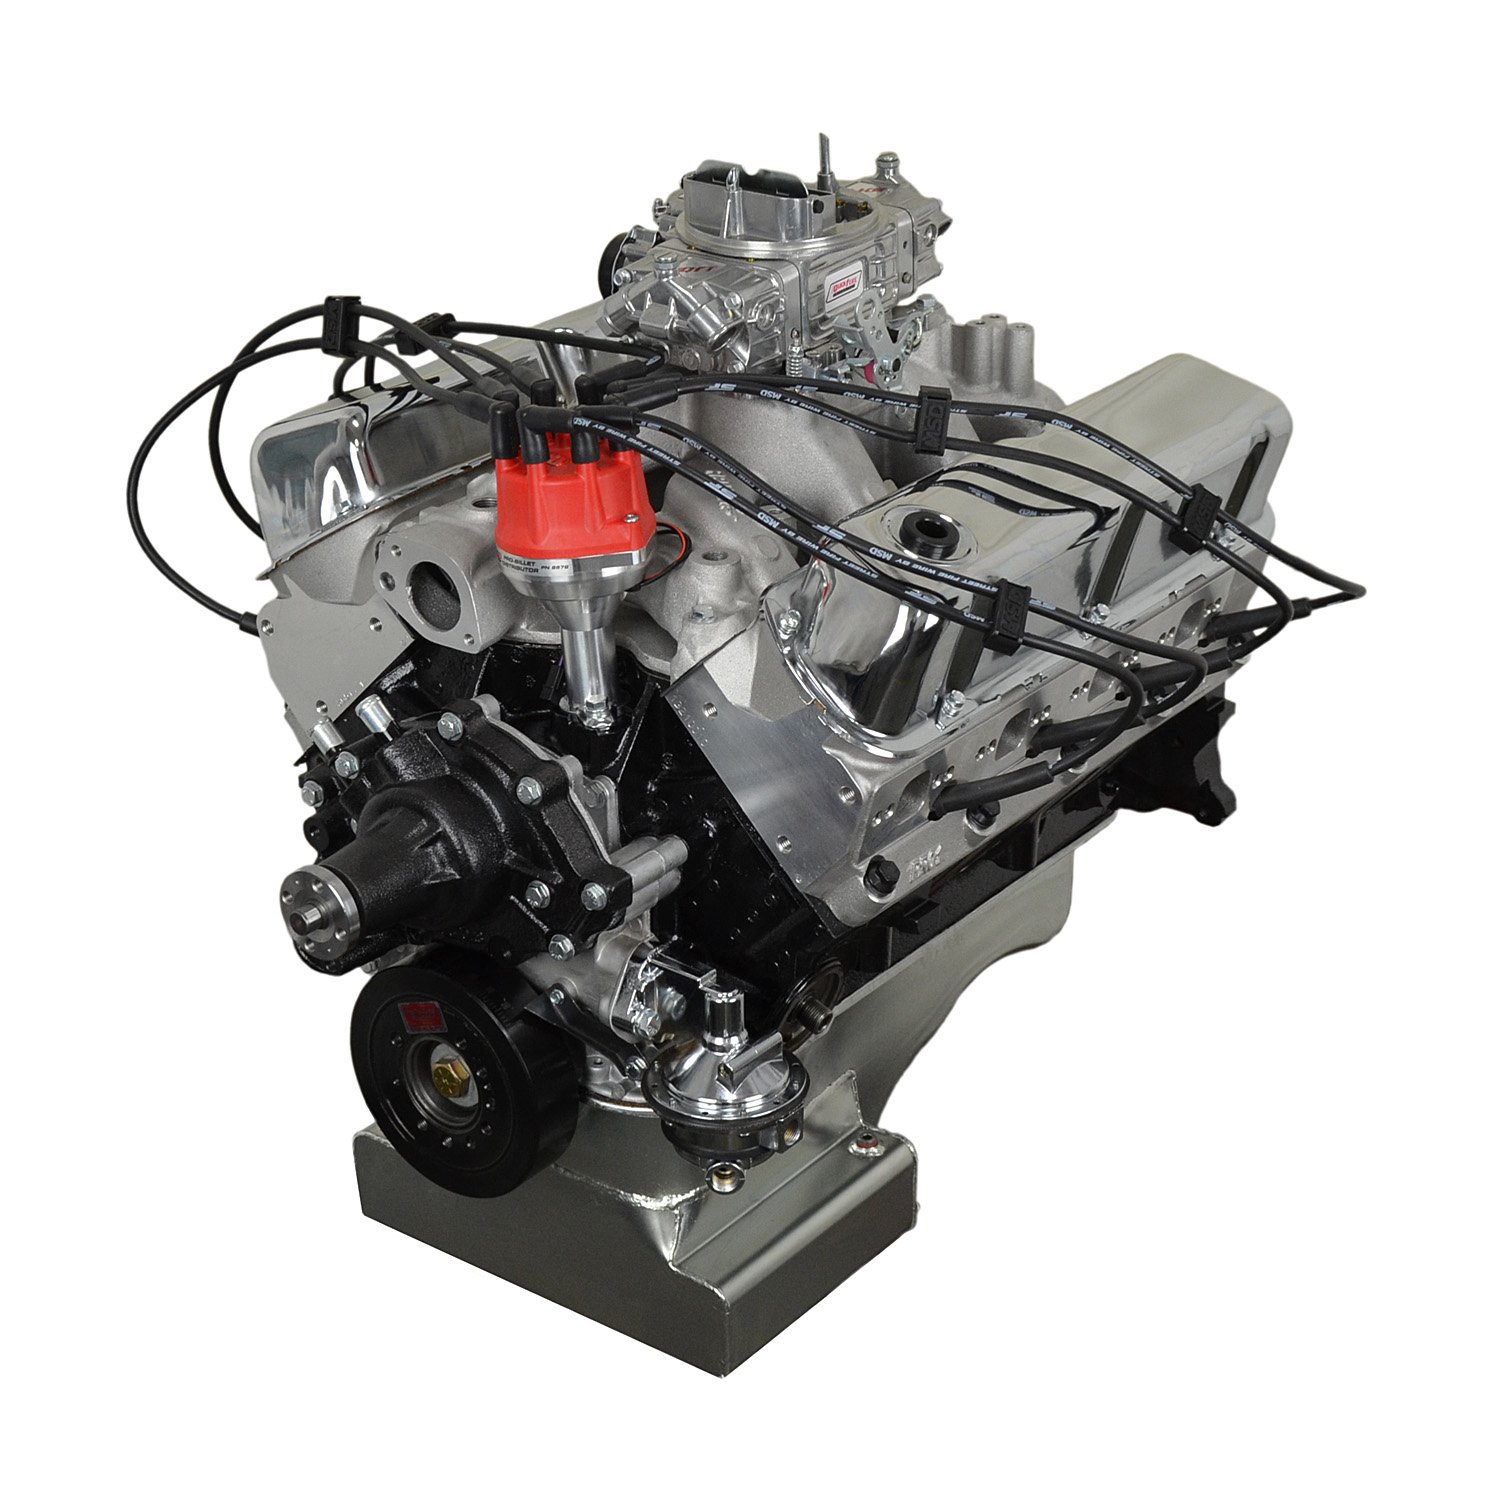 HP81C High Performance Crate Engine Small Block Ford 408ci / 480HP / 500TQ